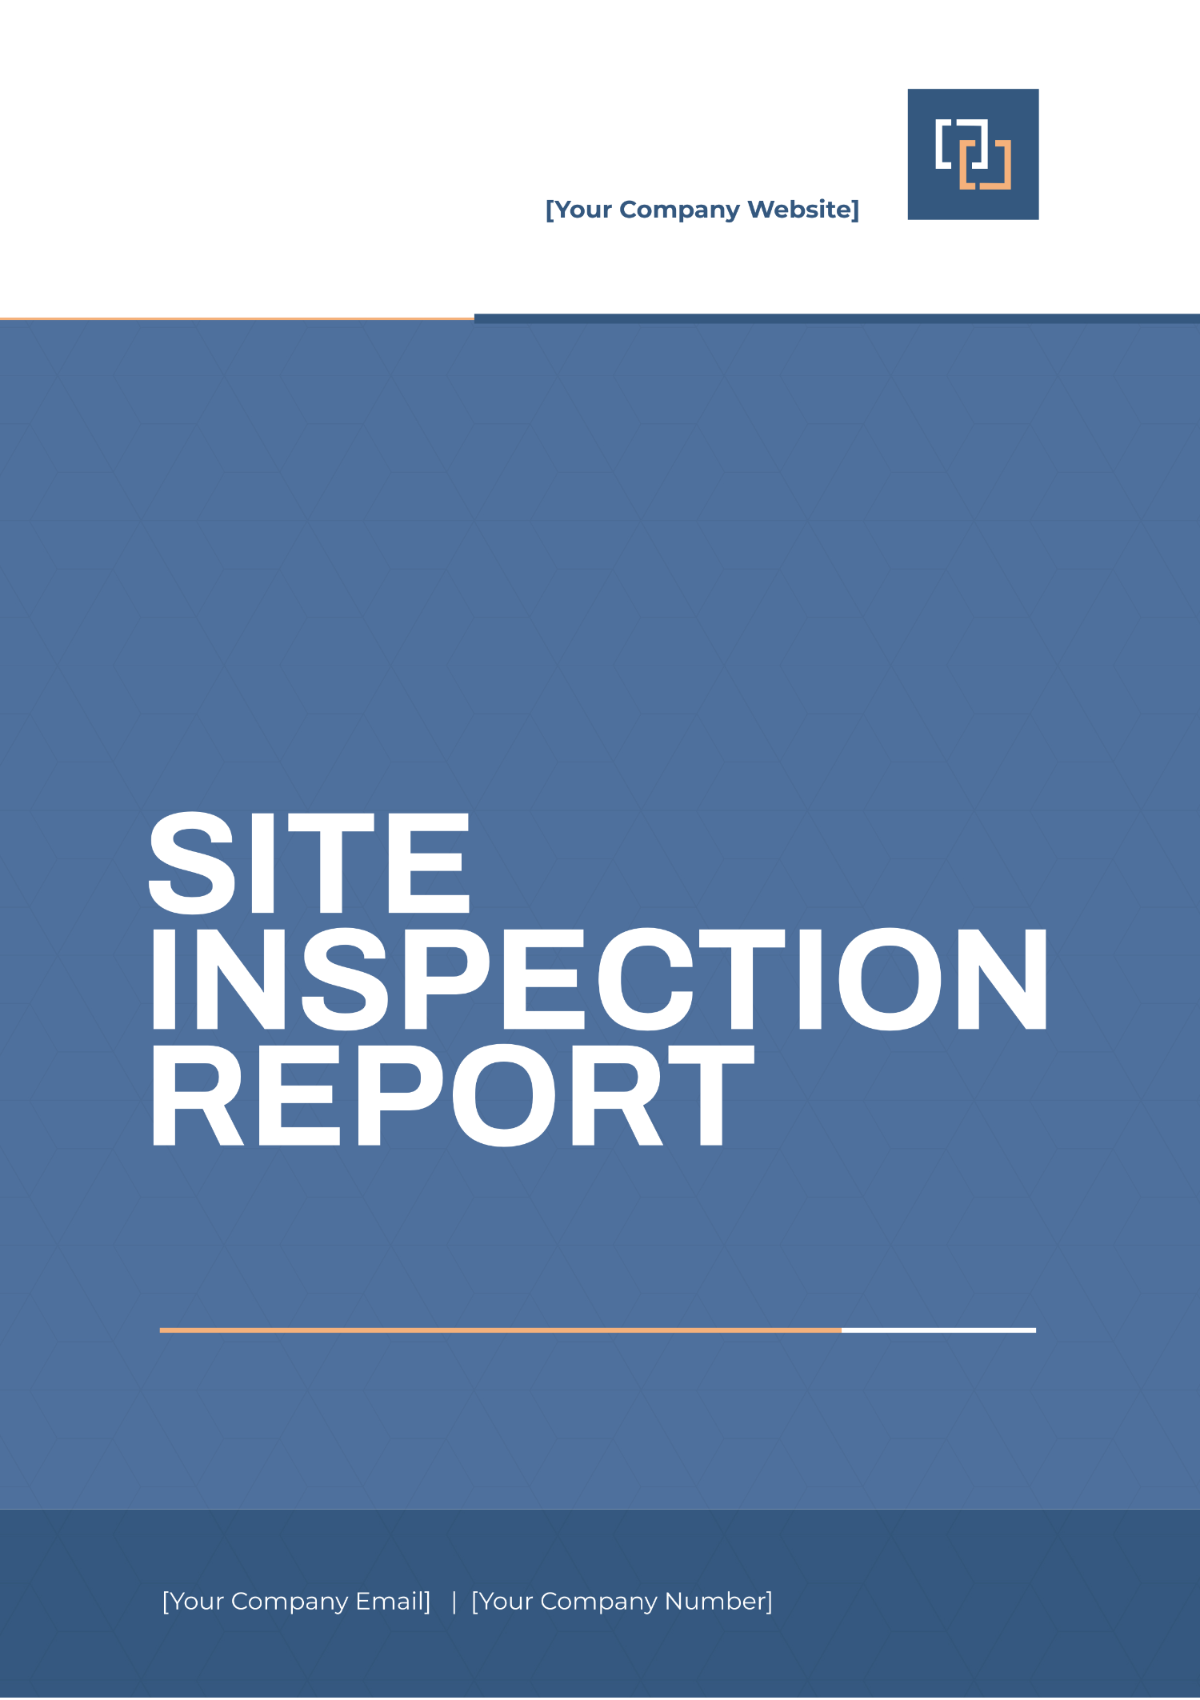 Site Inspection Report Template Edit Online Download Example